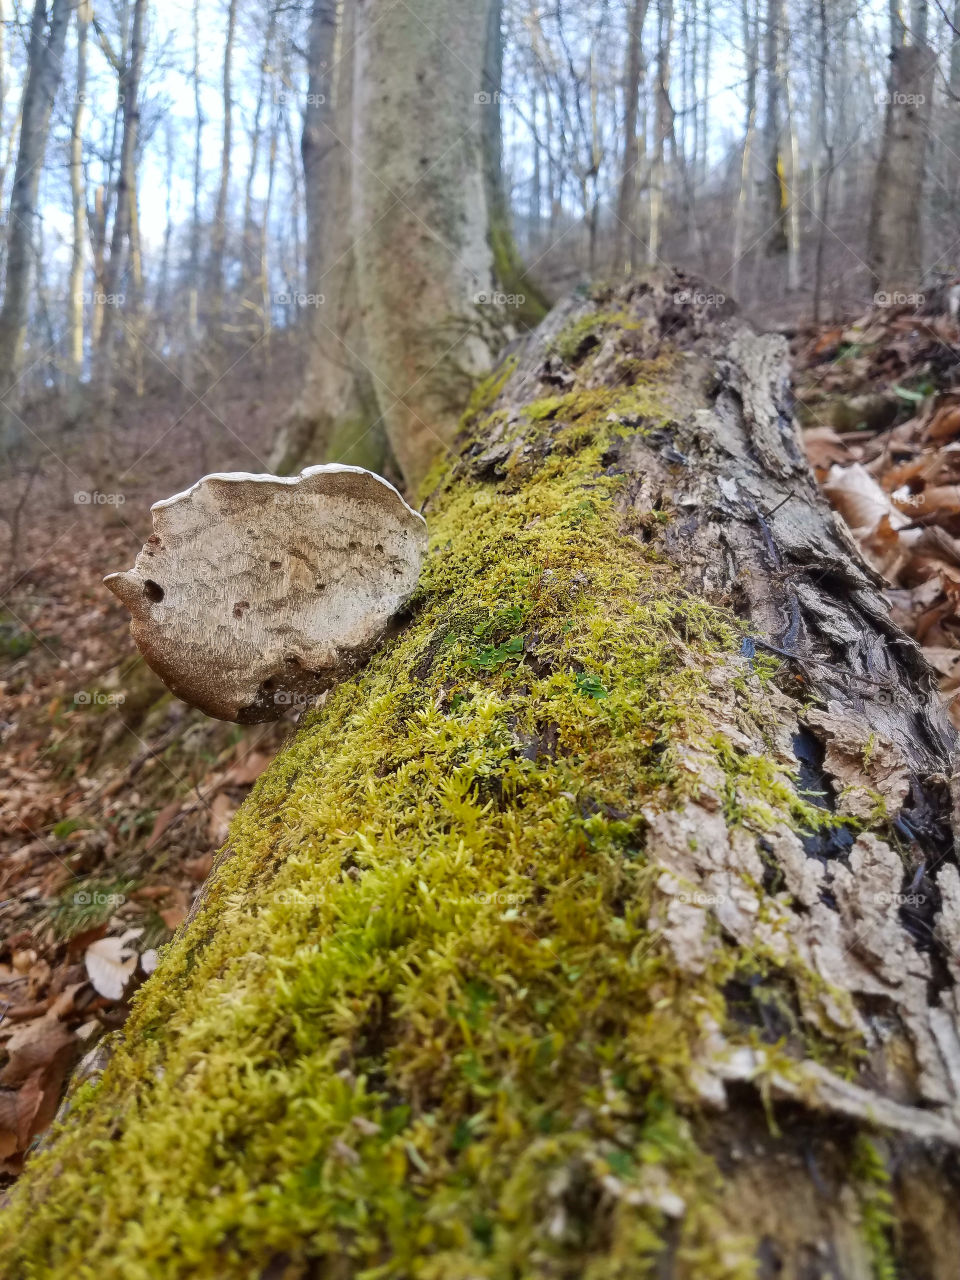 Moss covered fallen tree with a mushroom growing from it.